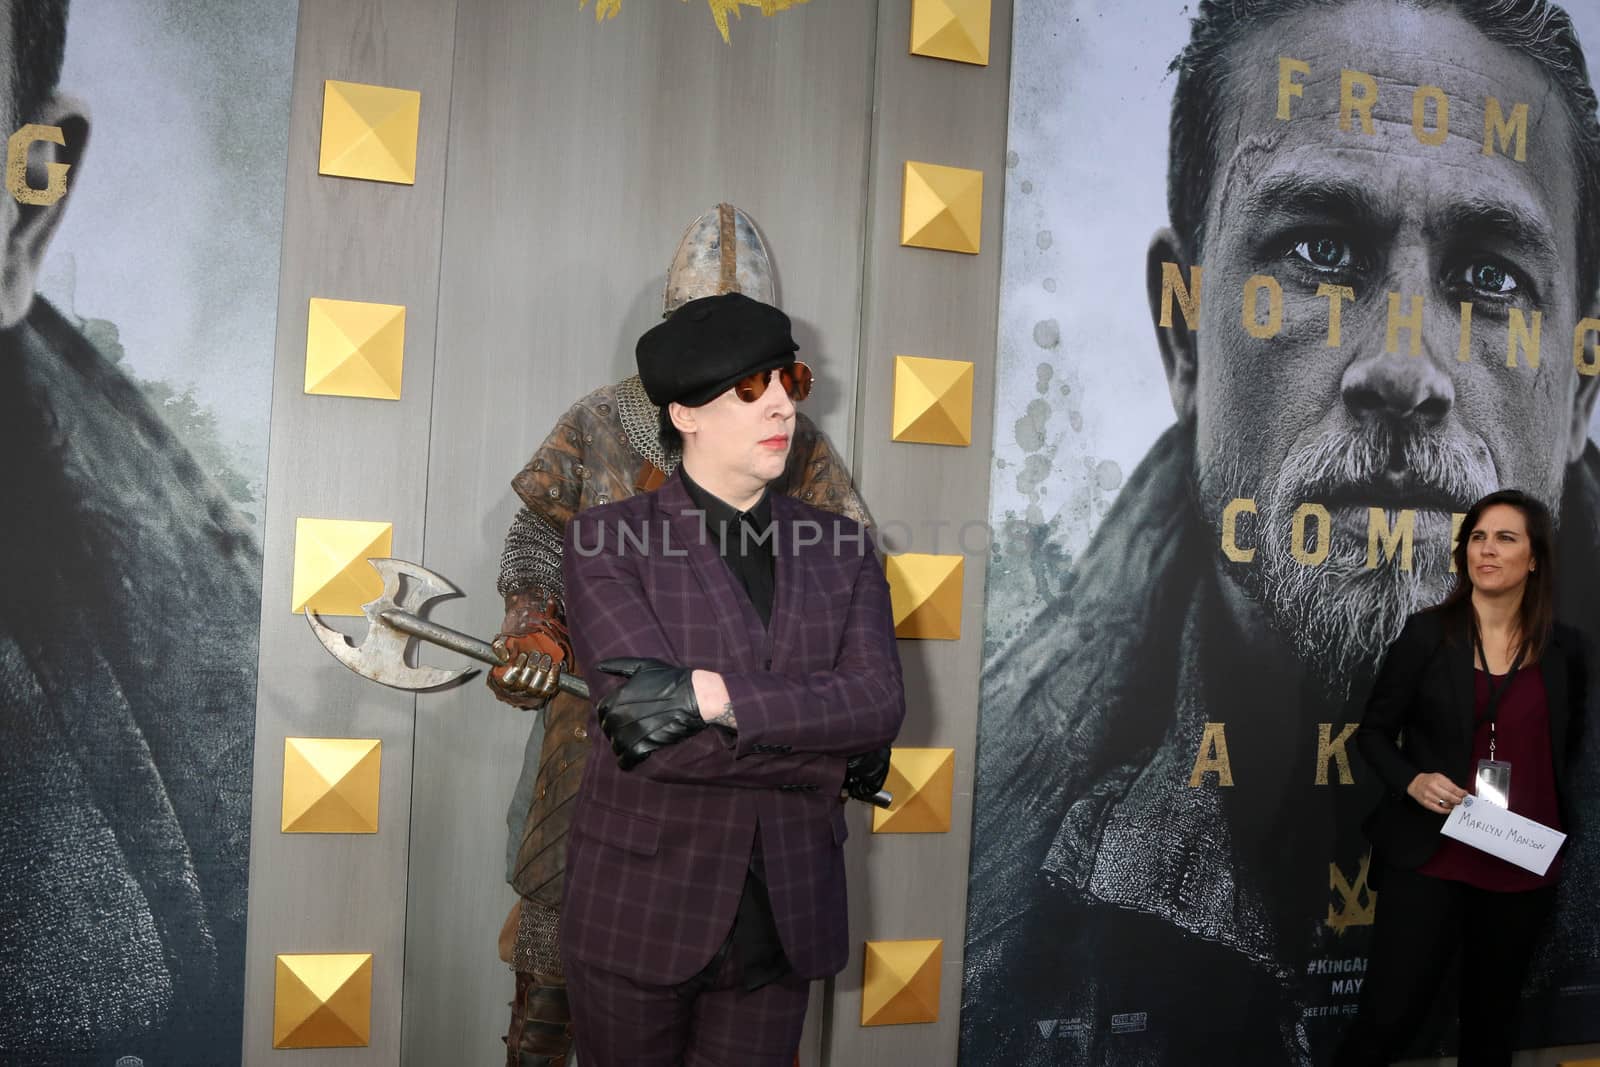 Marilyn Manson
at the "King Arthur Legend of the Sword" World Premiere, TCL Chinese Theater IMAX, Hollywood, CA 05-08-17